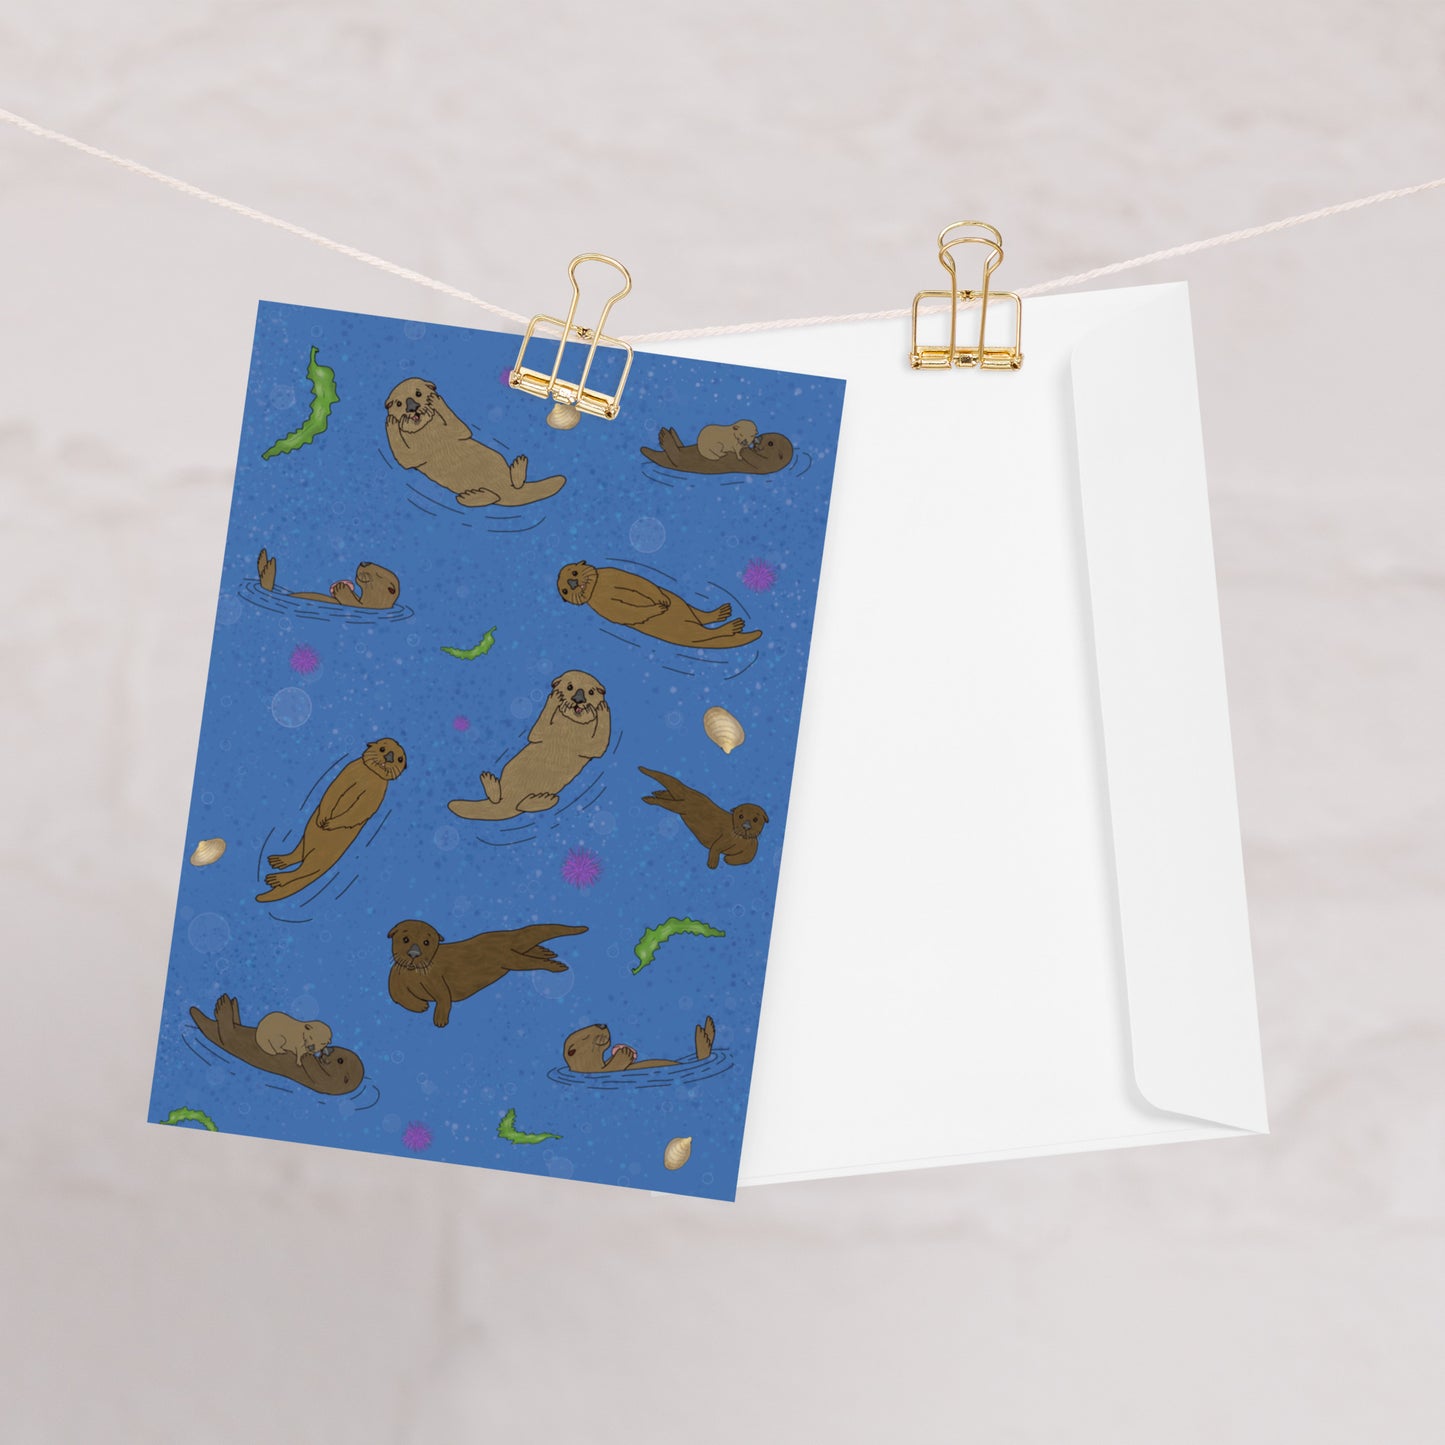 Pack of ten 5 x 7 inch greeting cards. Features illustrated sea otters on the front. Inside is blank. Made of coated paperboard. Comes with ten envelopes. One card shown on clothesline with white envelope.